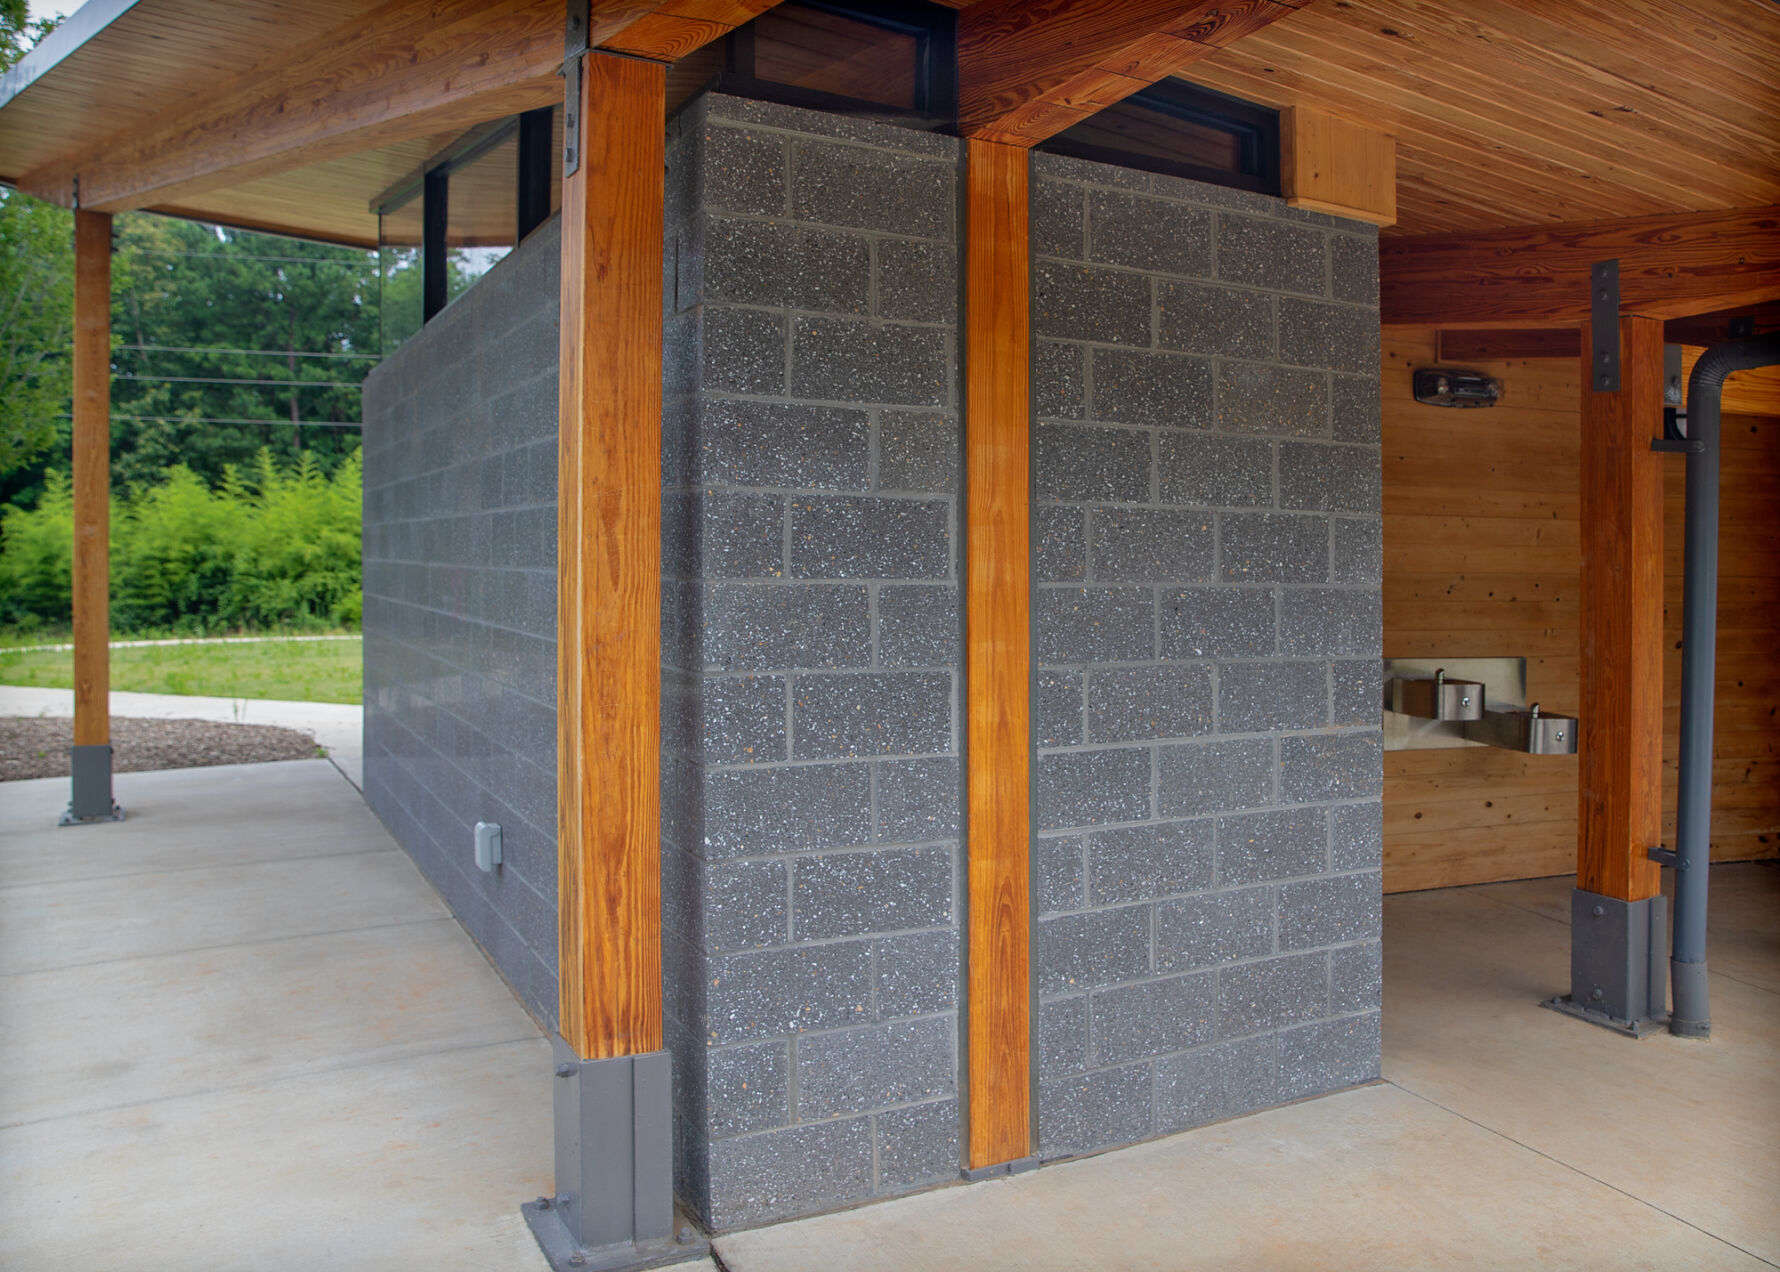 Sierra Park Shelter in Raleigh, NC featuring Prestige Masonry Architectural Block - Ground Face in Black Boulder